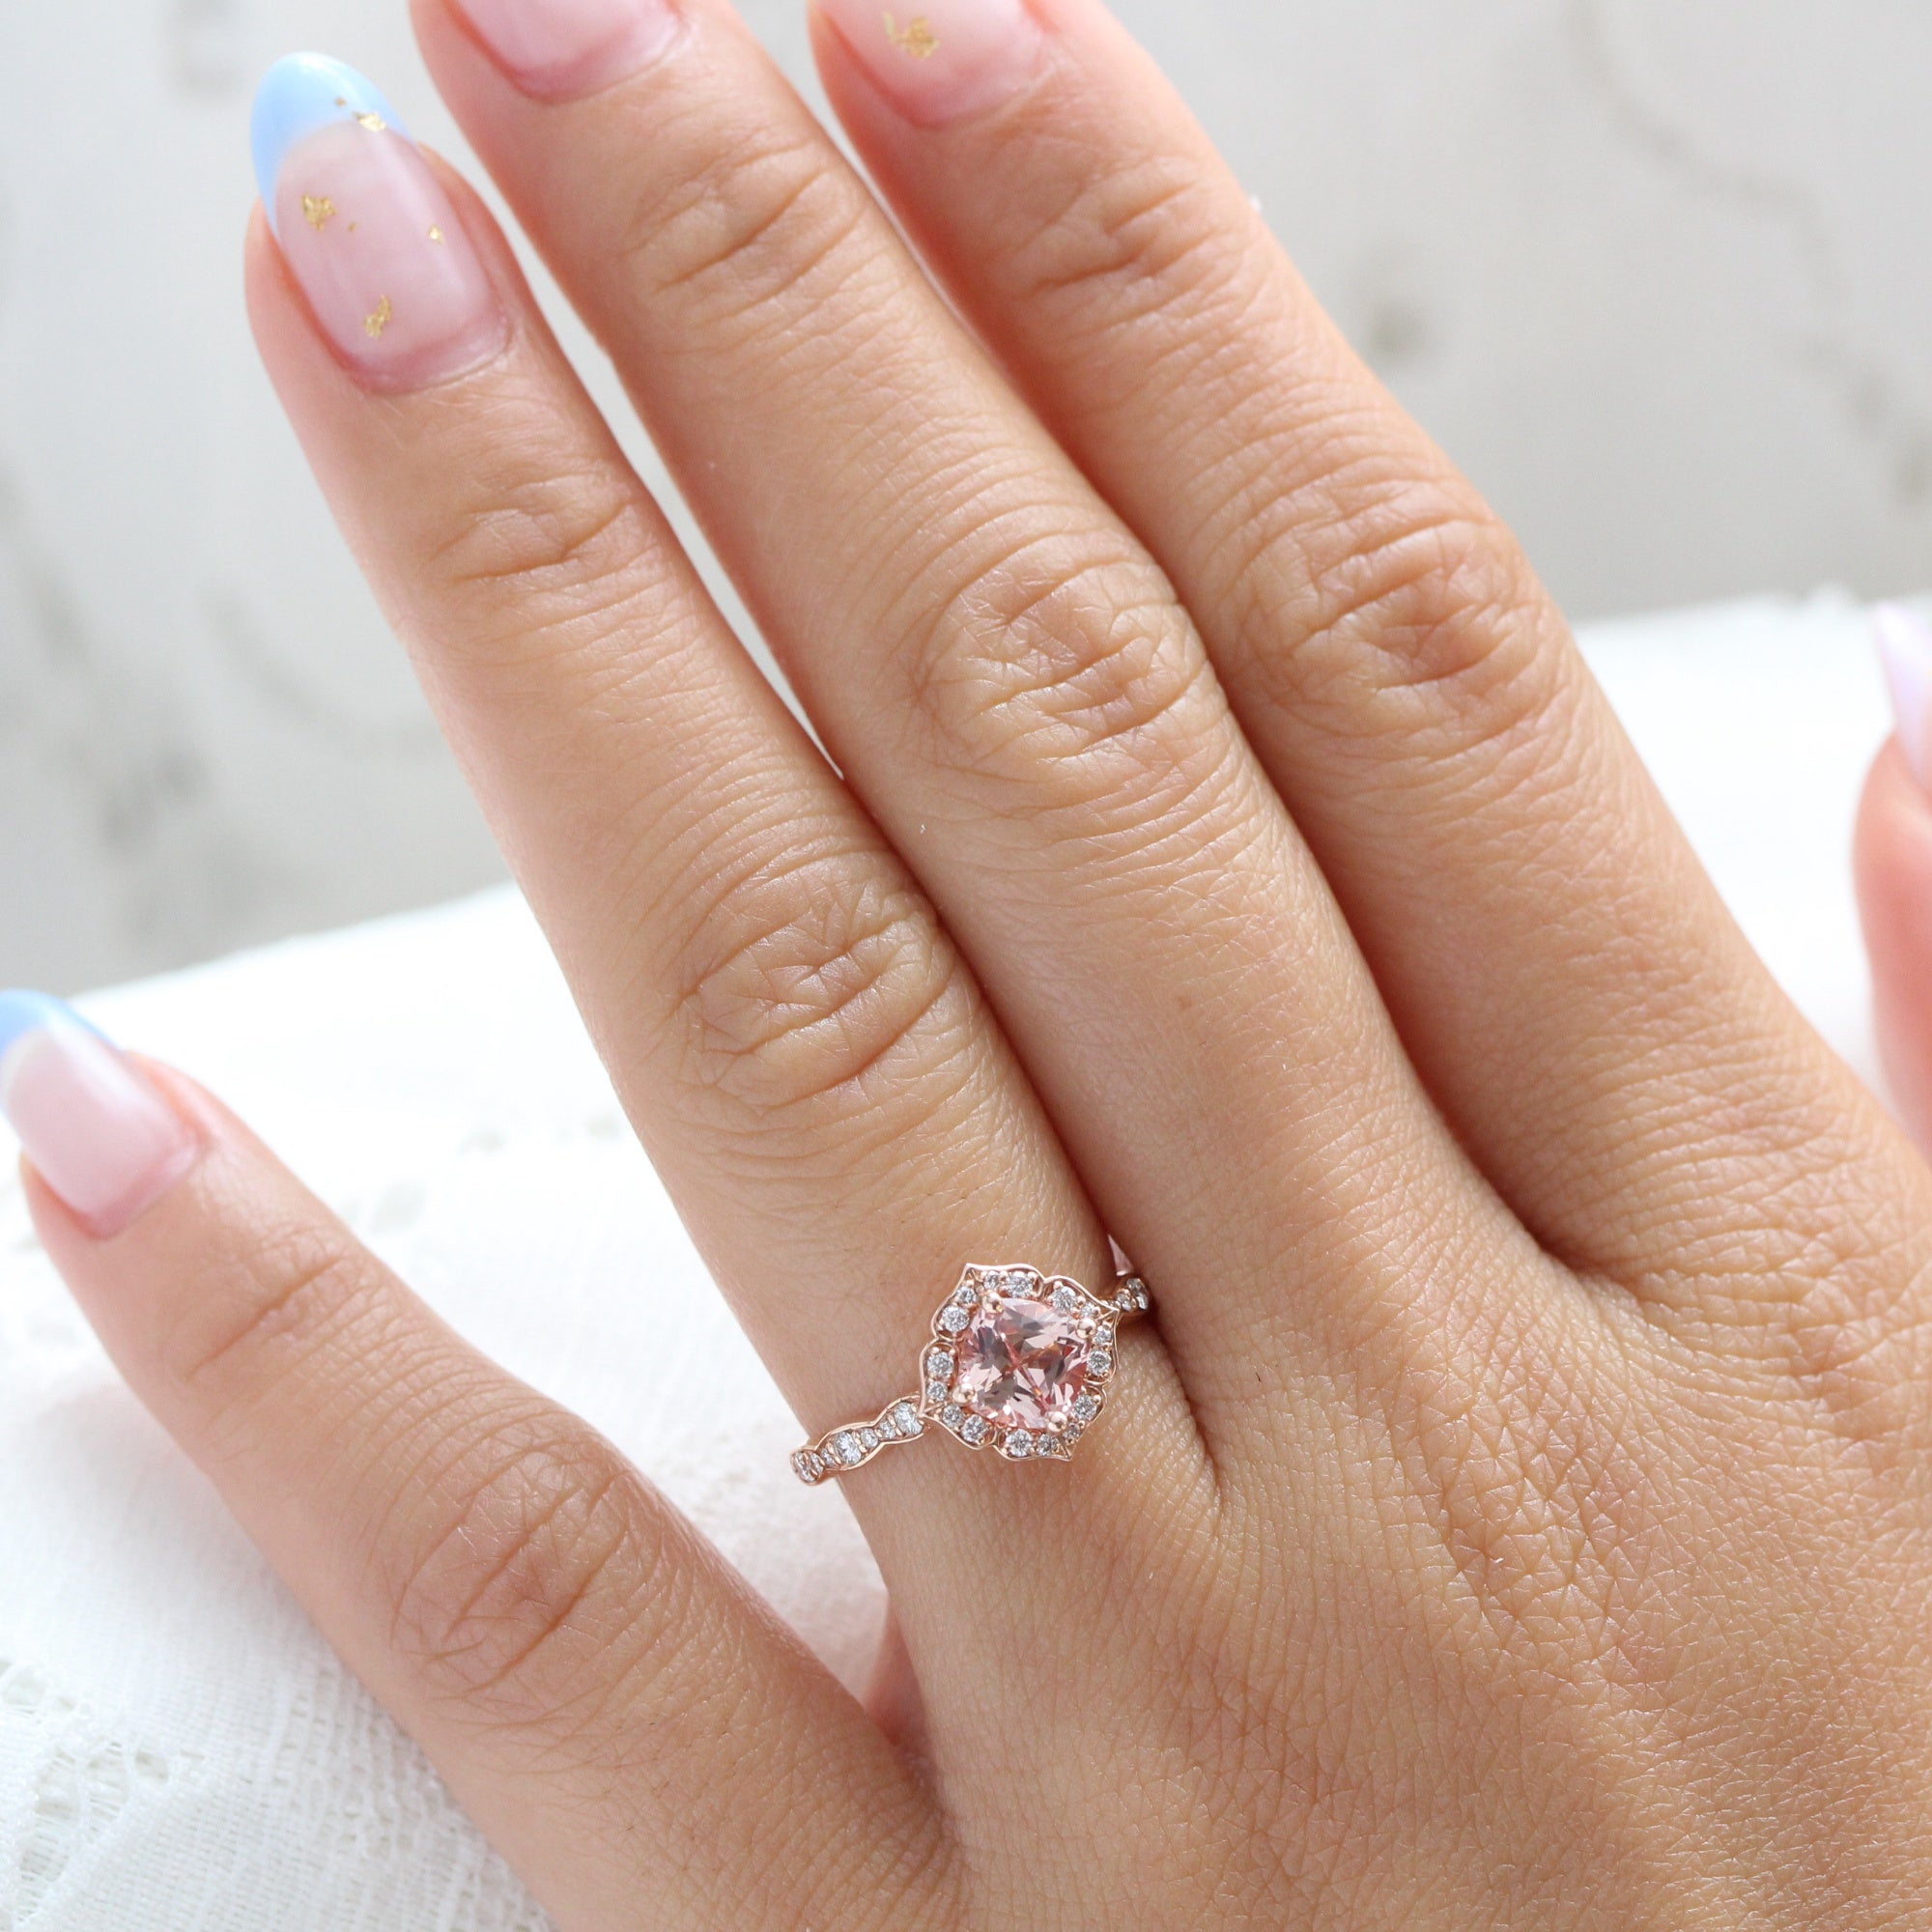 Mini Vintage Floral Peach Sapphire Ring in 14k Rose Gold Scalloped Diamond Band, Size 6